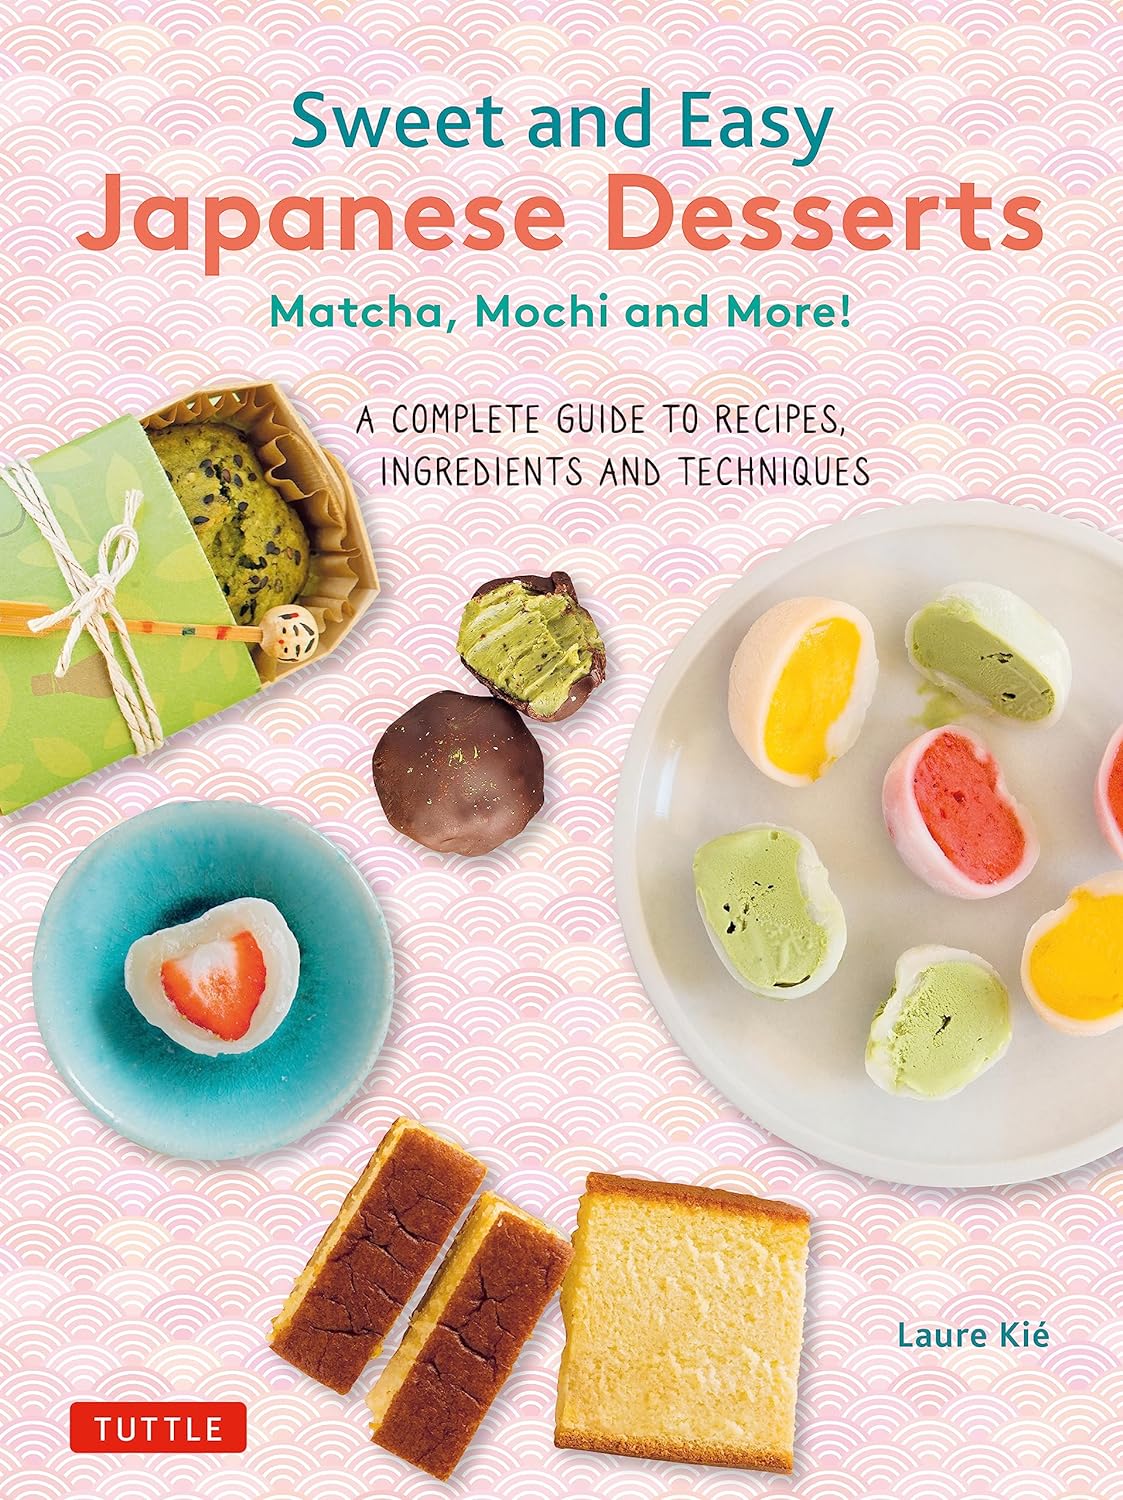 Sweet and Easy Japanese Desserts: Matcha, Mochi and More! A Complete Guide to Recipes, Ingredients and Techniques Paperback (Laure Kie)